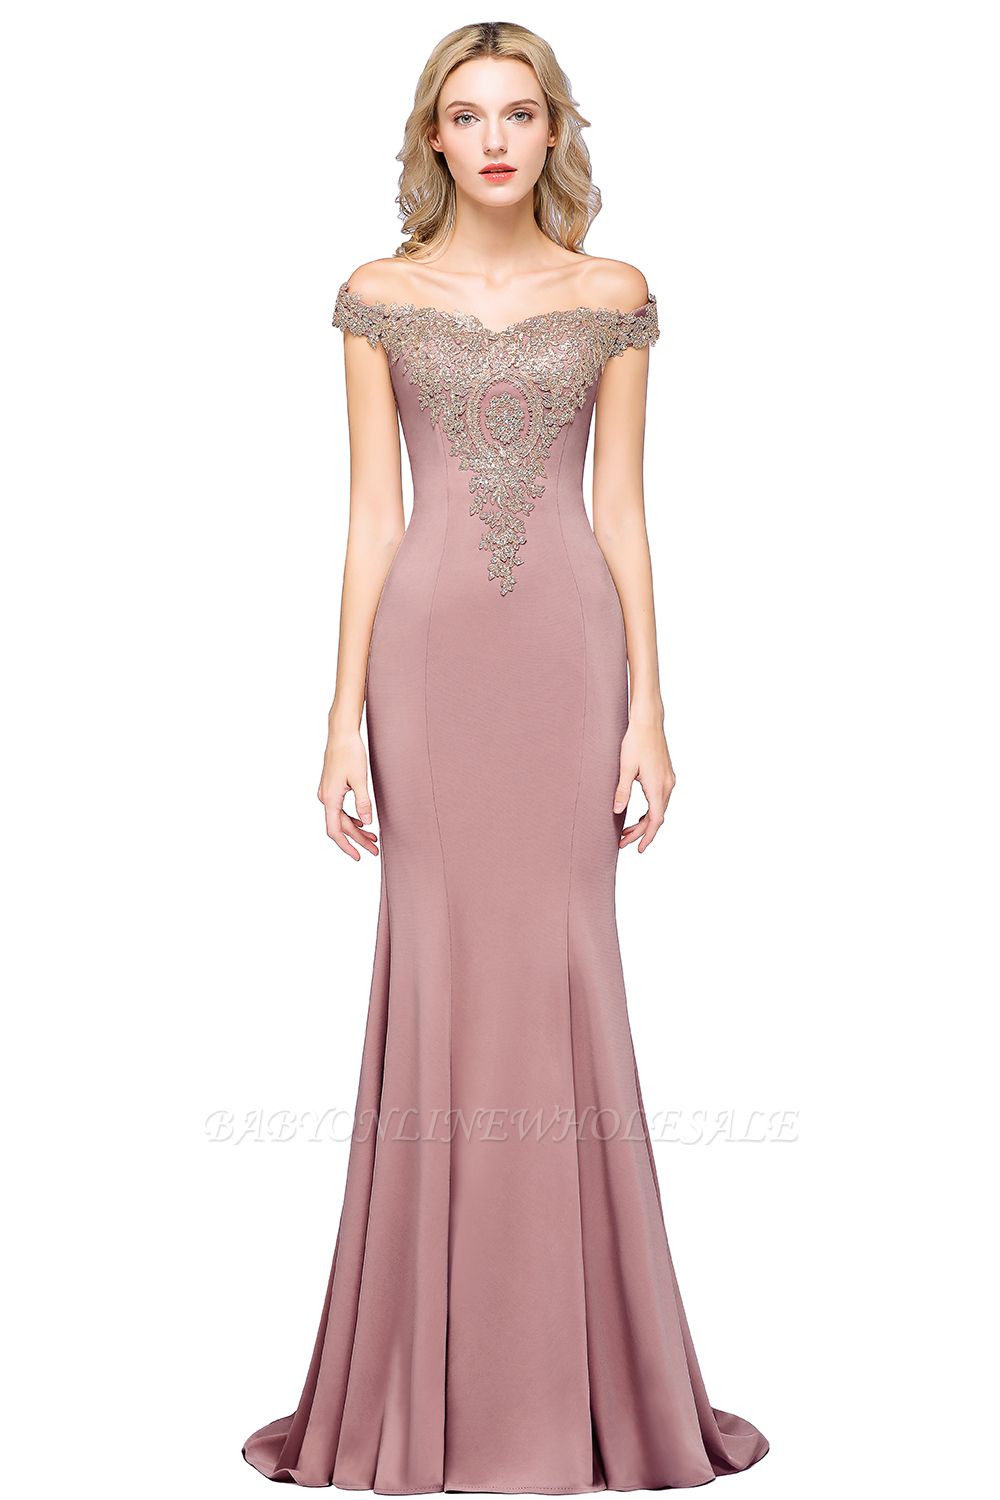 Simple Off-the-shoulder Burgundy Formal Dress with Lace Appliques